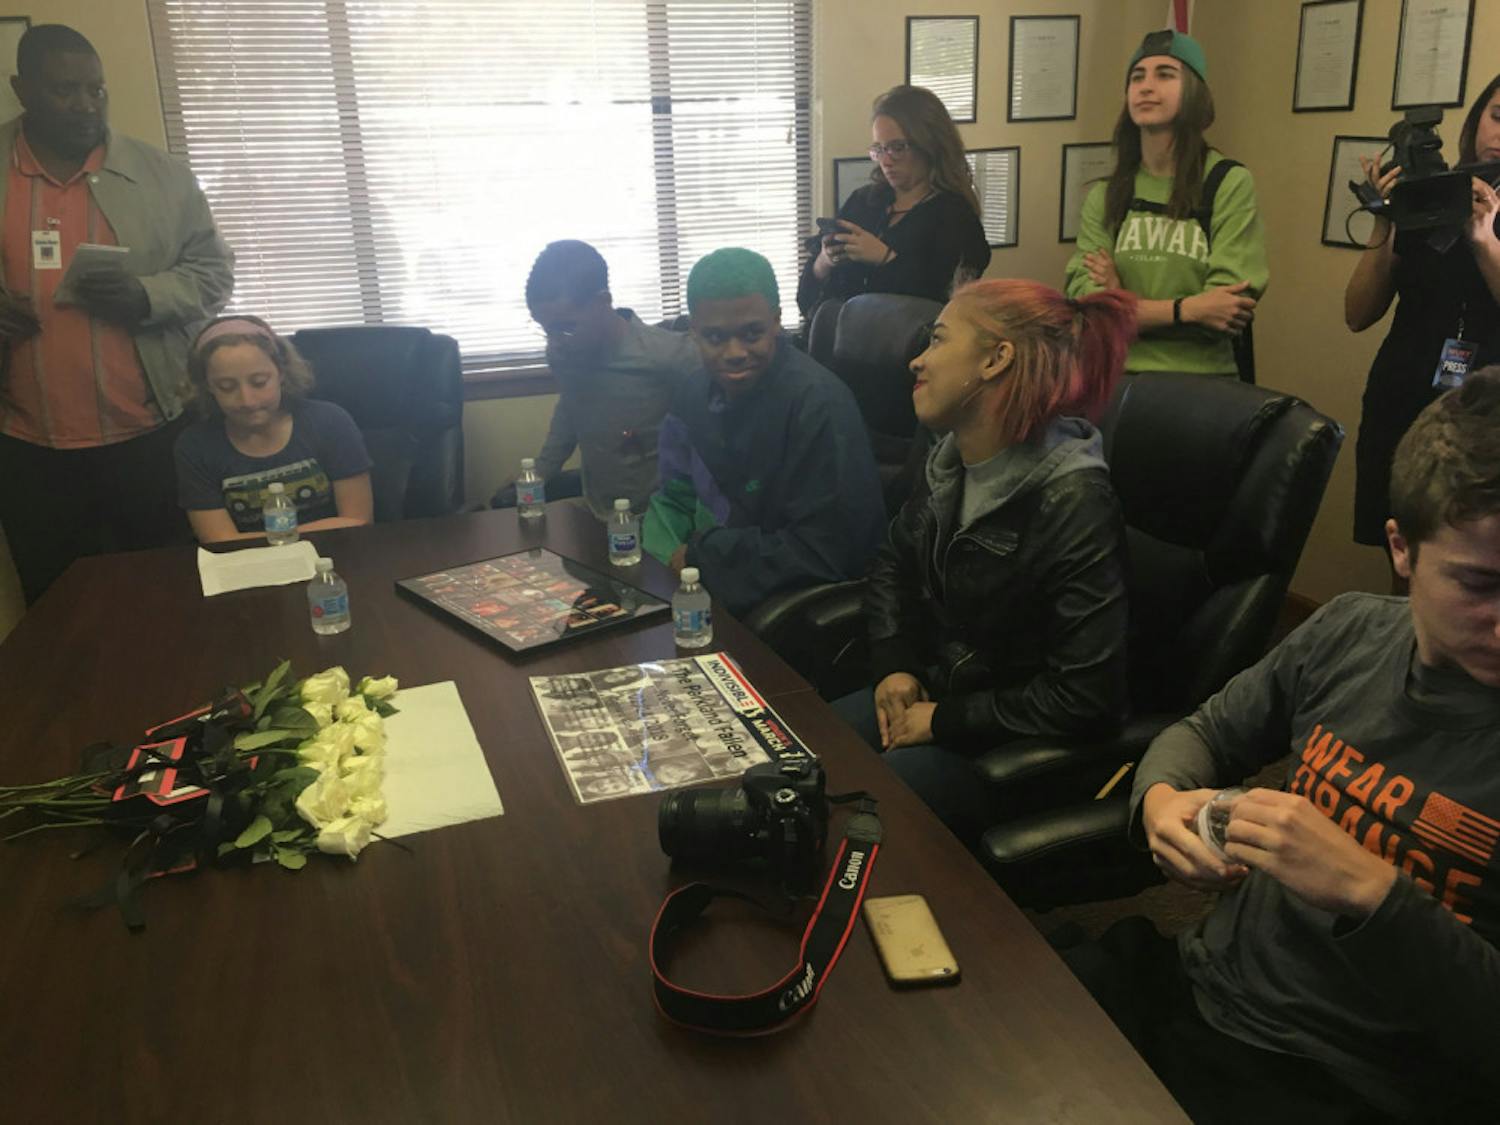 Five students, including one middle schooler, Skyped with Congressman Ted Yoho, who was in his Washington D.C. office Wednesday during the nationwide Walkout Wednesday protest.